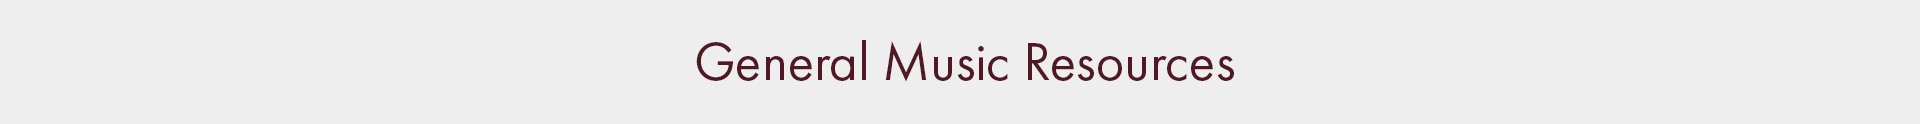 General Music Resources 